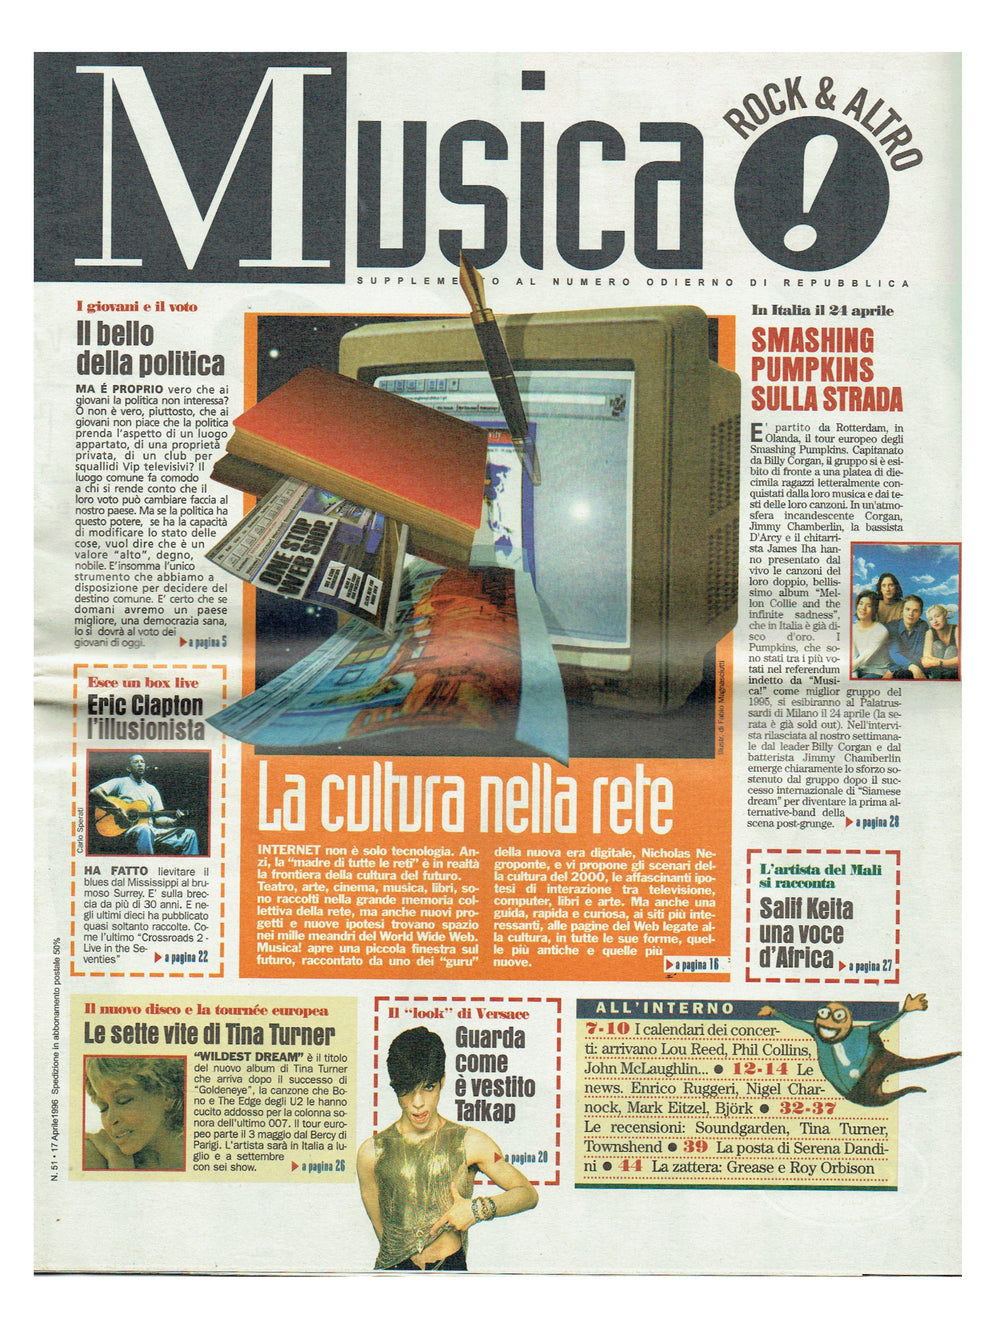 Prince Musica Magazine April 17th 1996 Insert Cover & 2 Page Article Italian Versace